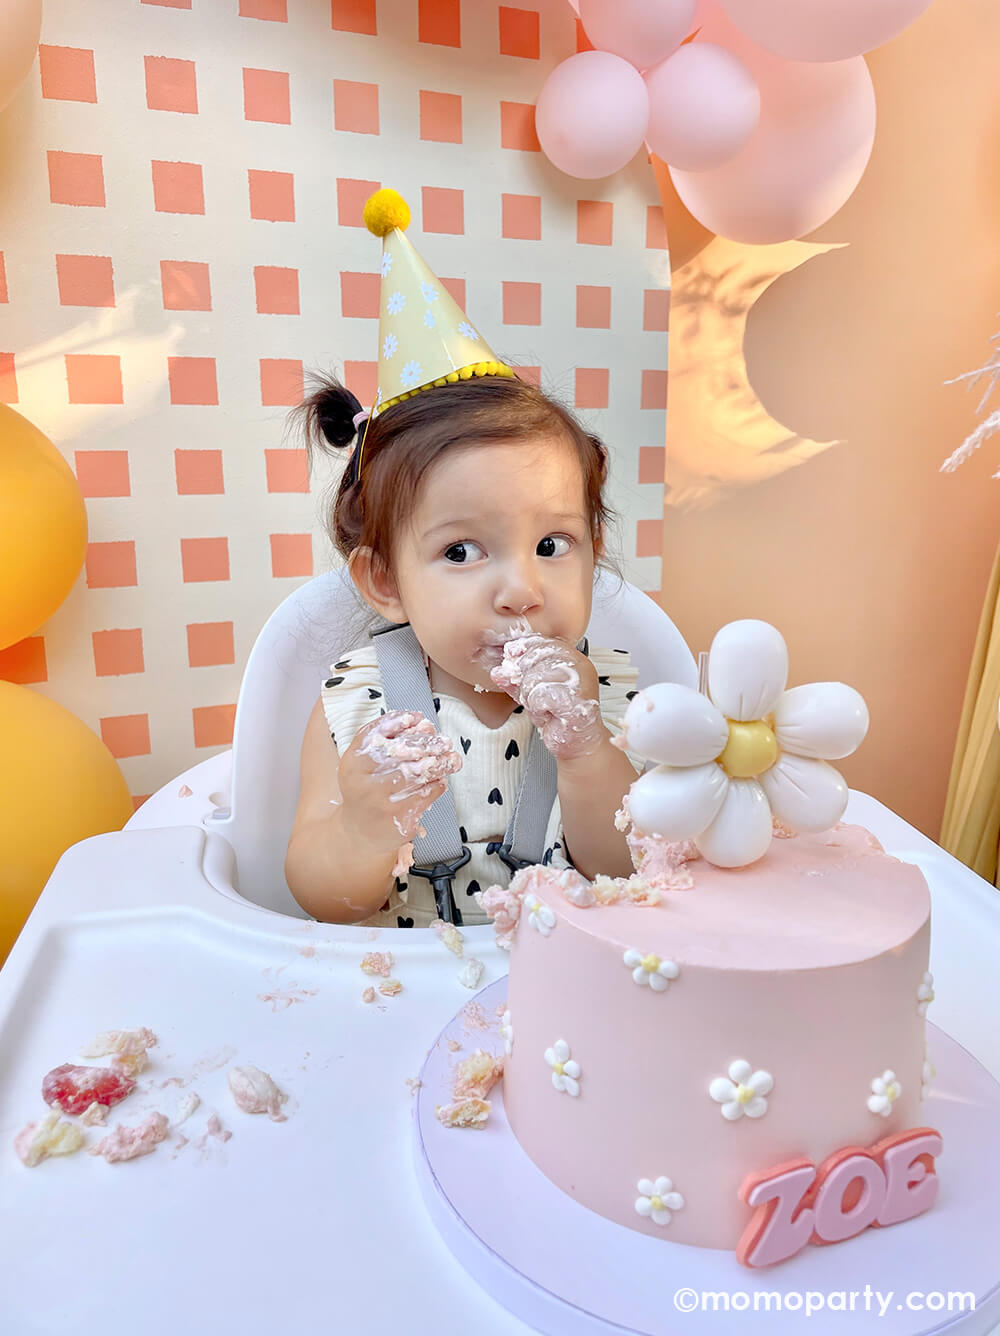 Momo Party One Groovy Baby First Birthday Party, with a birthday girl wearing a Retro Daisy Party Hat, sitting in the hair chair, eating her modern groovy-themed light pink smash cake decorated with Dasiy flower topper and Zoe in the front. She sitting in front of a check-patterned wooden Backdrop board decorated with latex balloons in peach, pink, and Goldenrod colors. This decoration is such a stand-out backdrop and photo booth for a Groovy birthday party, baby showers, and almost any other joyful event